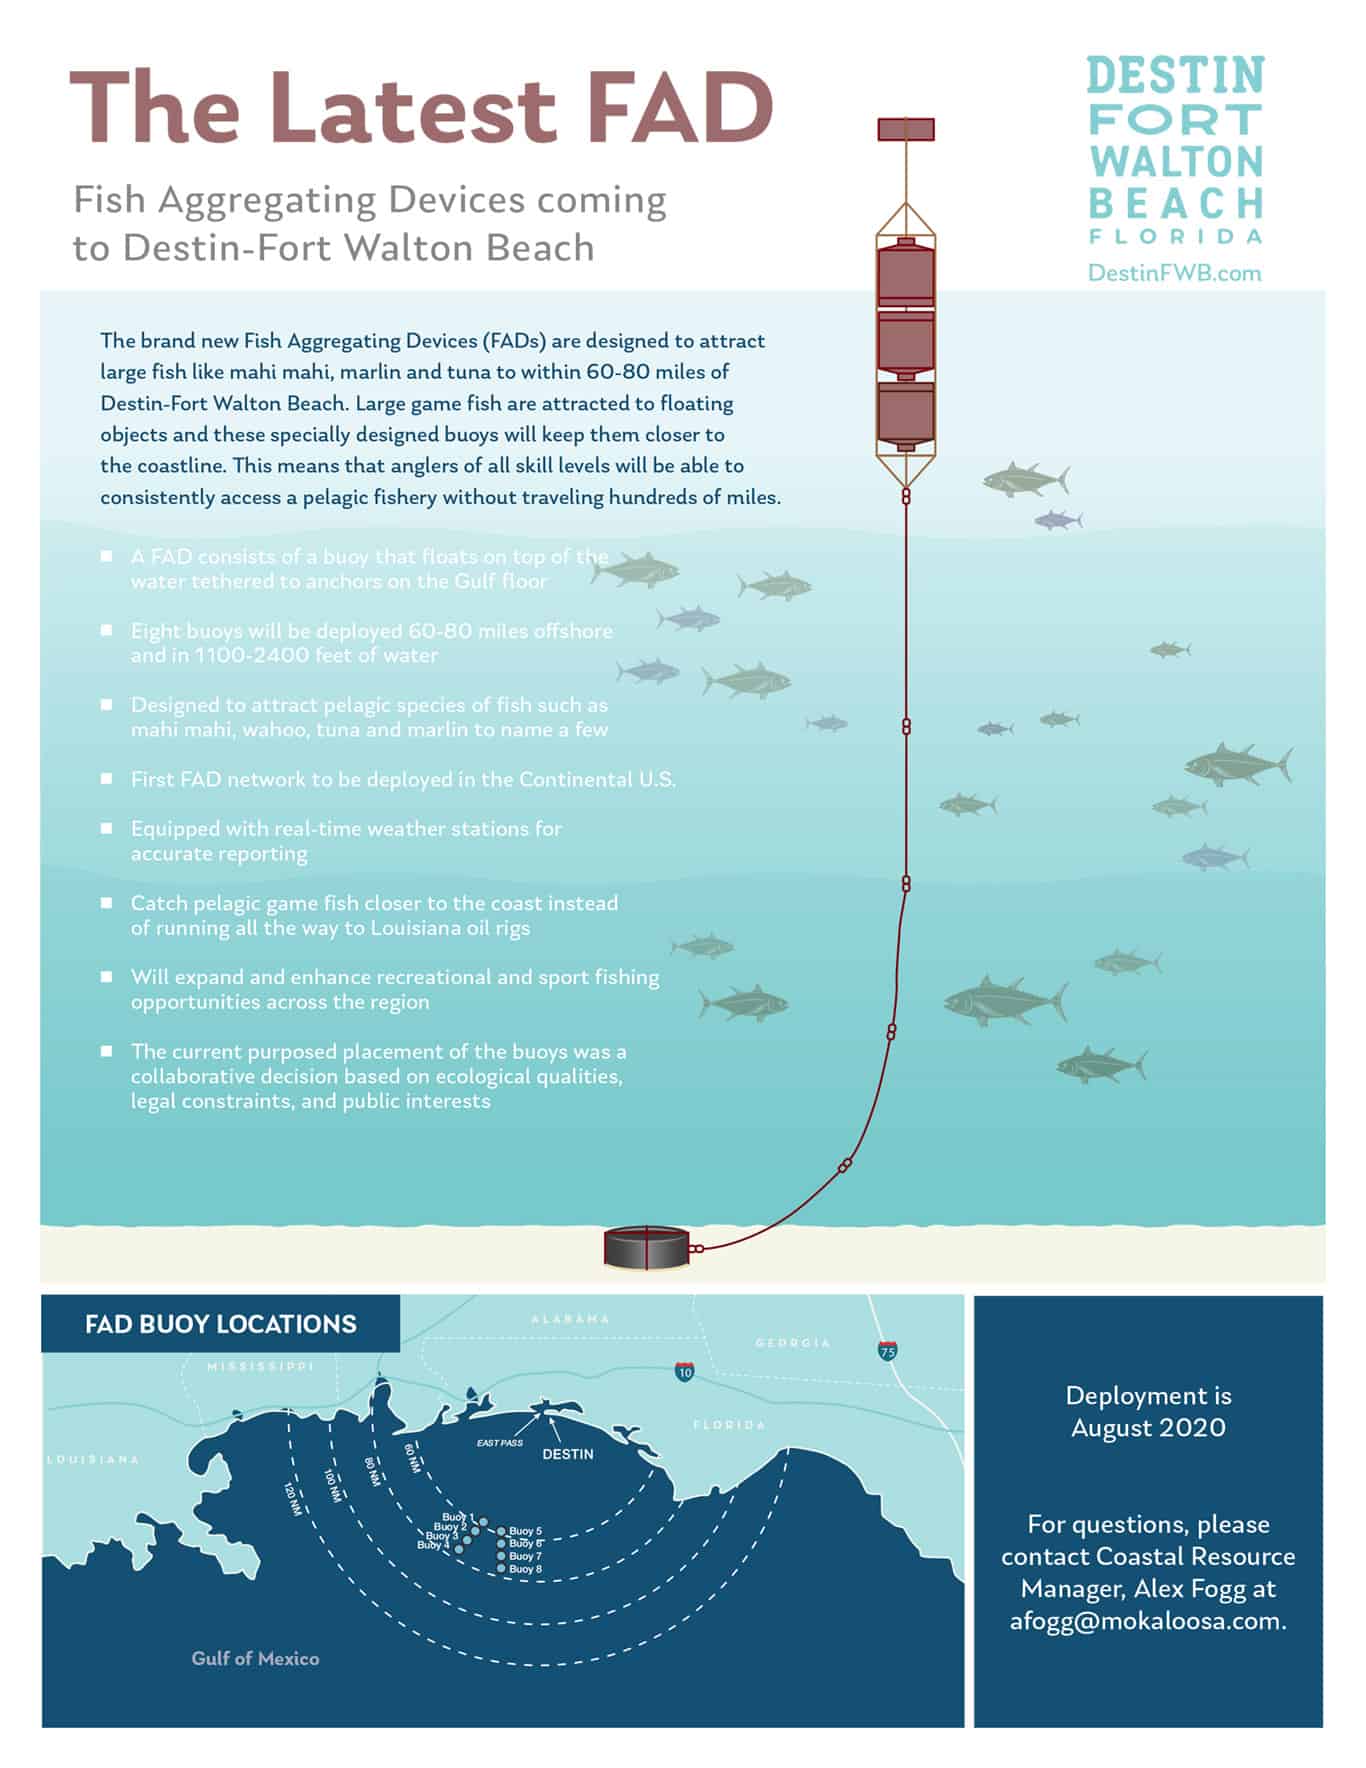 Fish Aggregating Devices - When Fishing is More Than a FAD